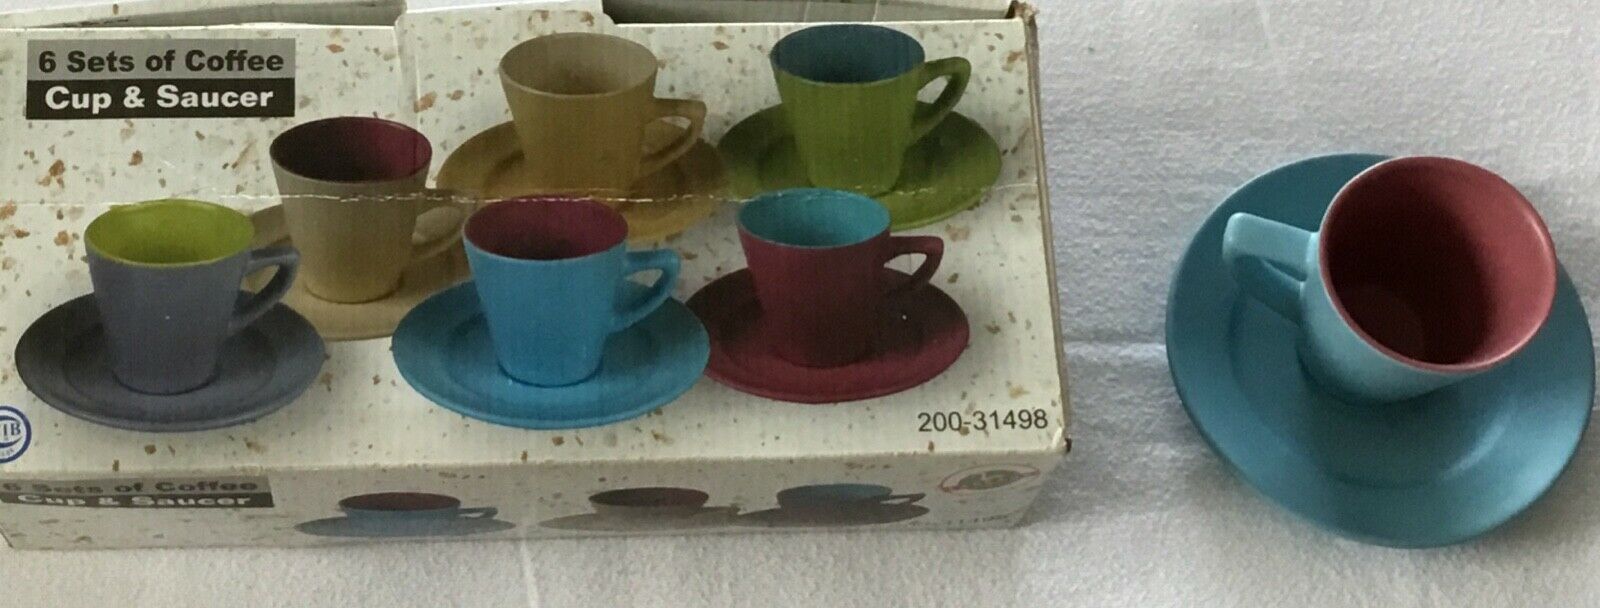 Tea Party China Tea Set for A Child, set of 6 Cups/Saucers